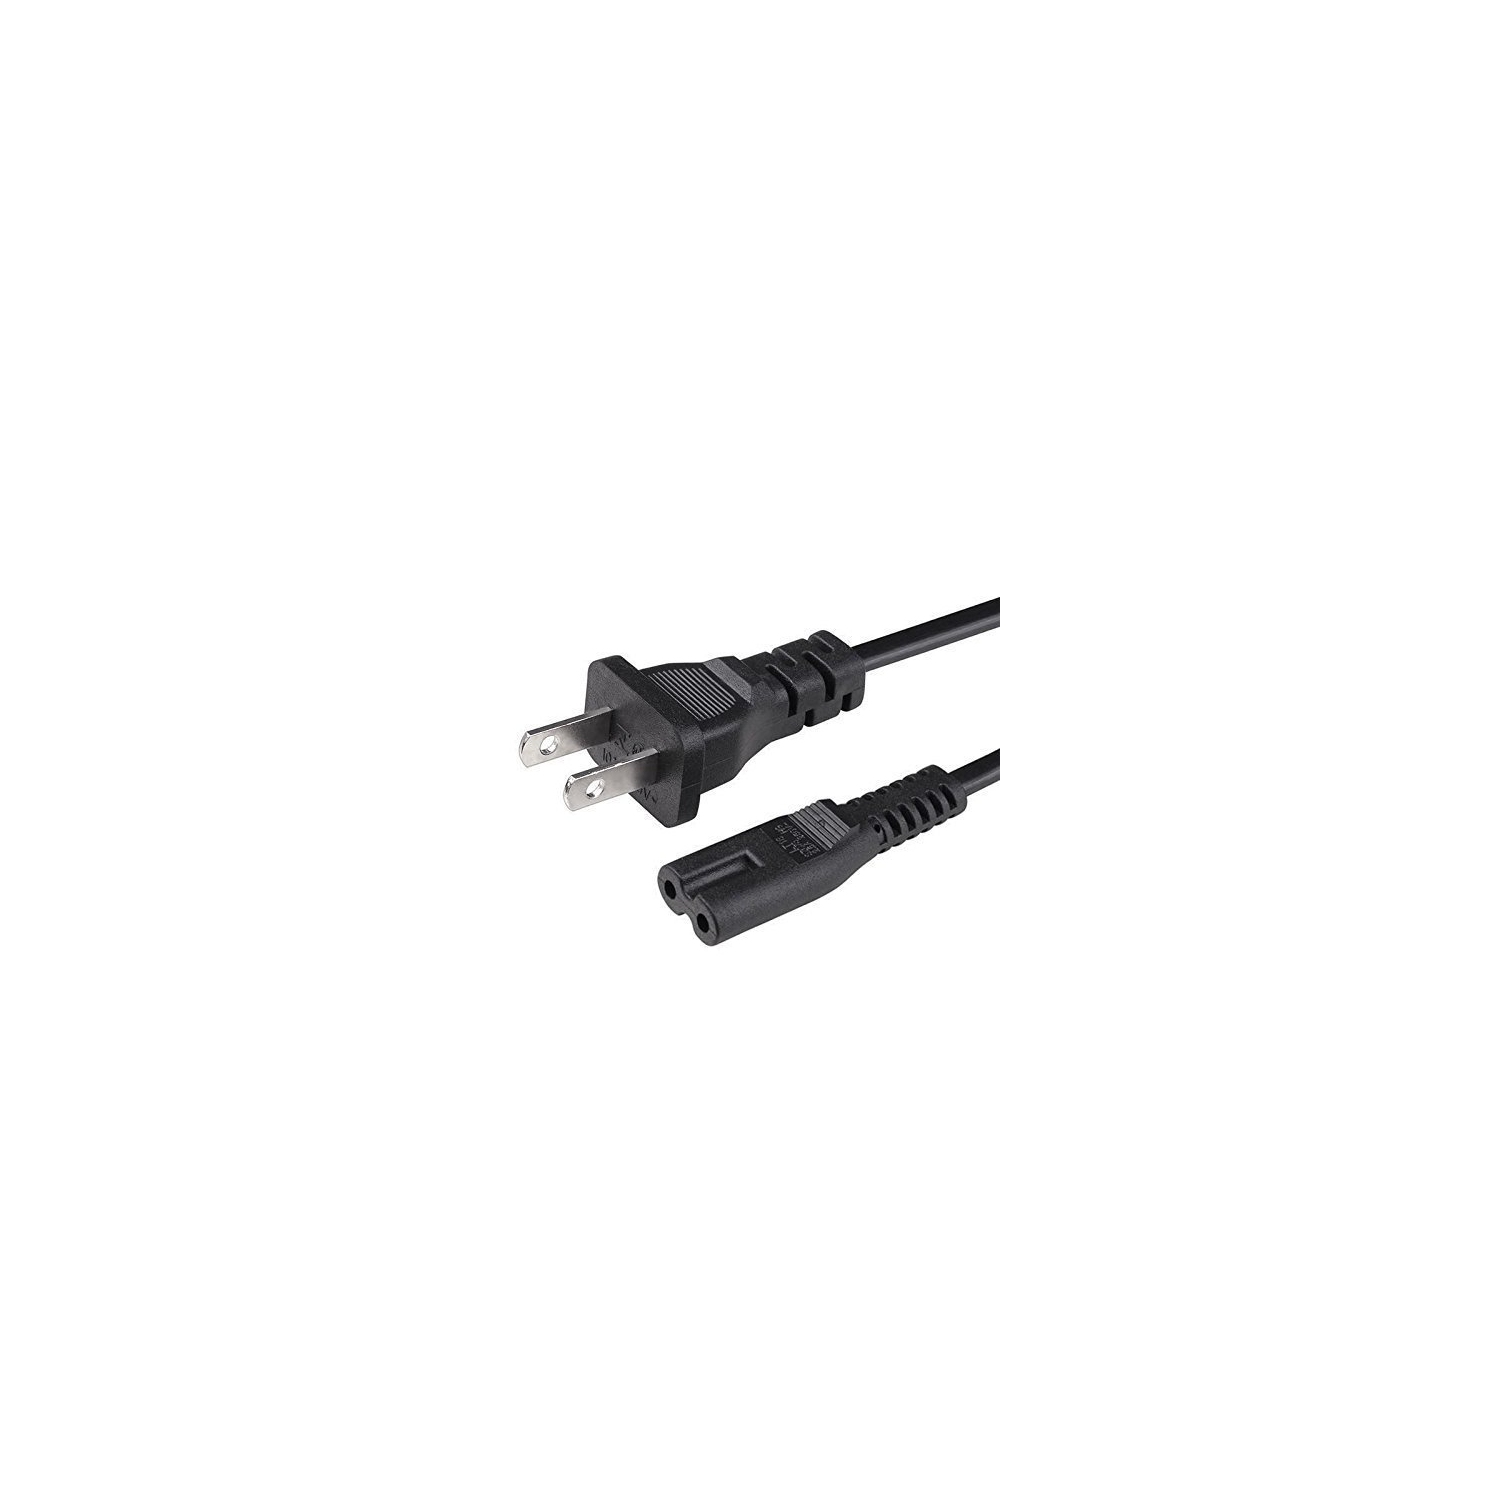 Omnihil AC Power Cord Compatible with Arris Router Modem; Vizio, Sharp Sanyo Emerson TV; Sony Playstation 1 2 PS1 PS2;